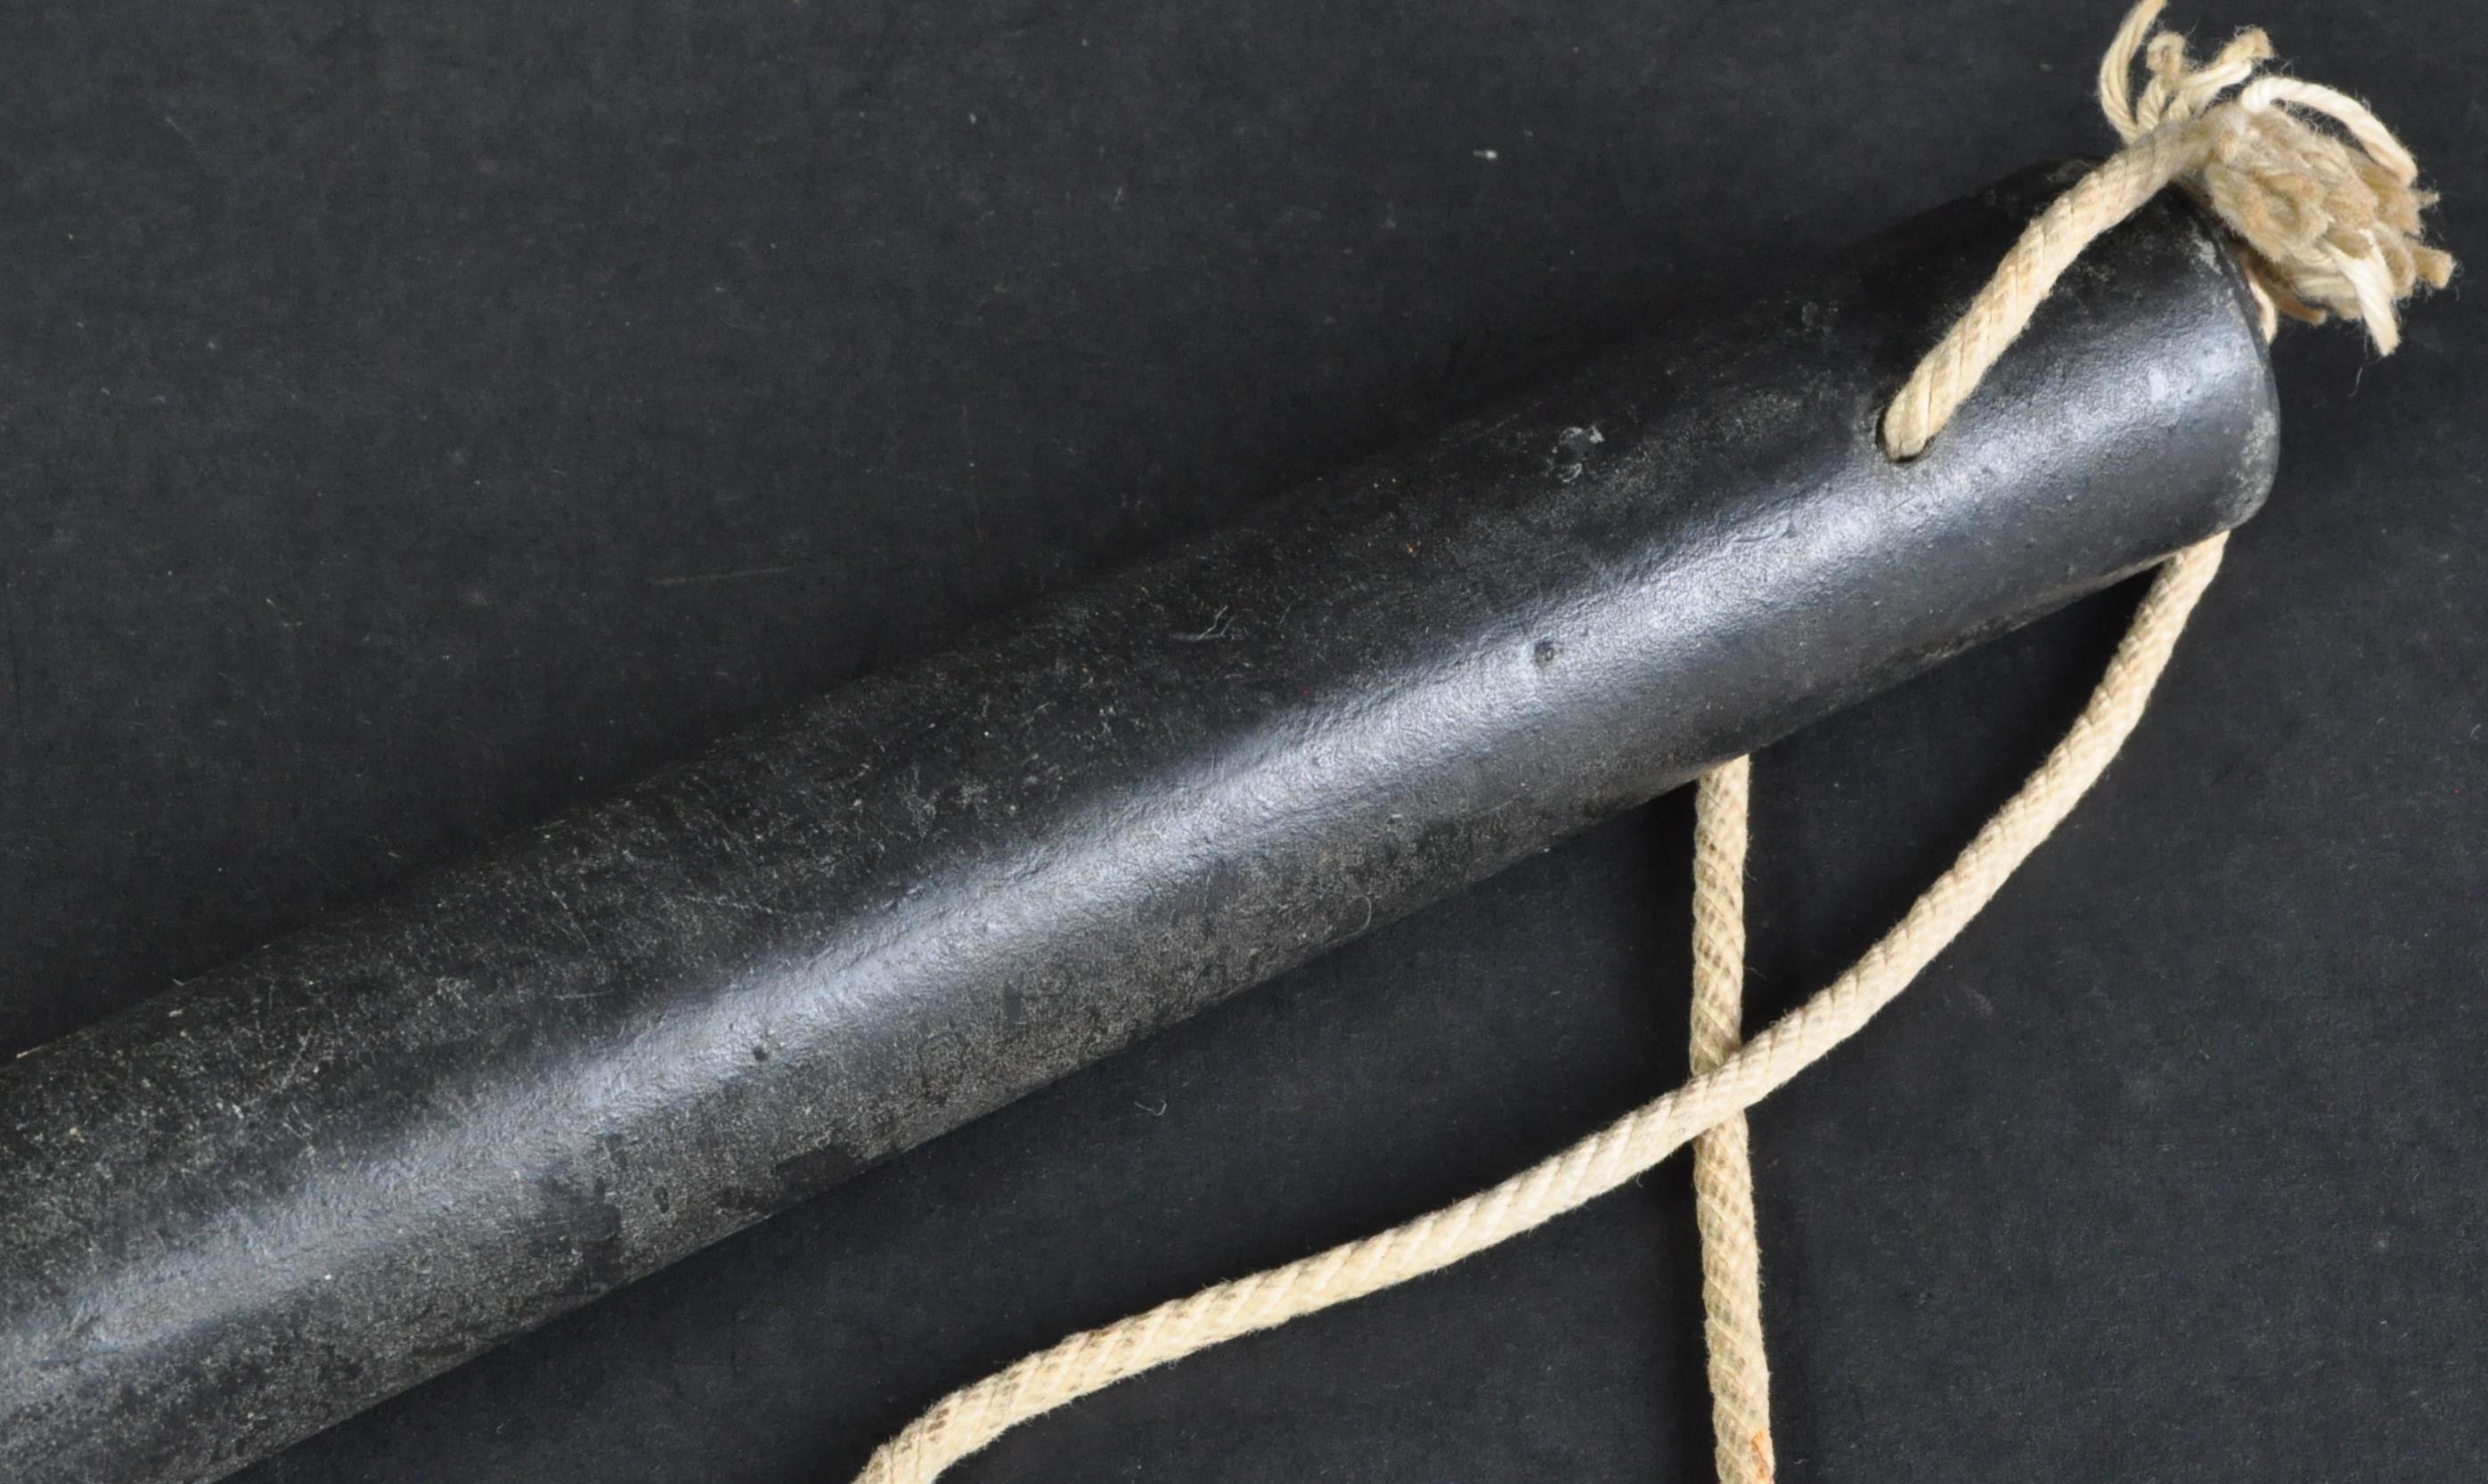 WWII SECOND WORLD WAR - SCARCE SPECIAL FORCES RUBBER KOSH / TRUNCHEON - Image 3 of 4